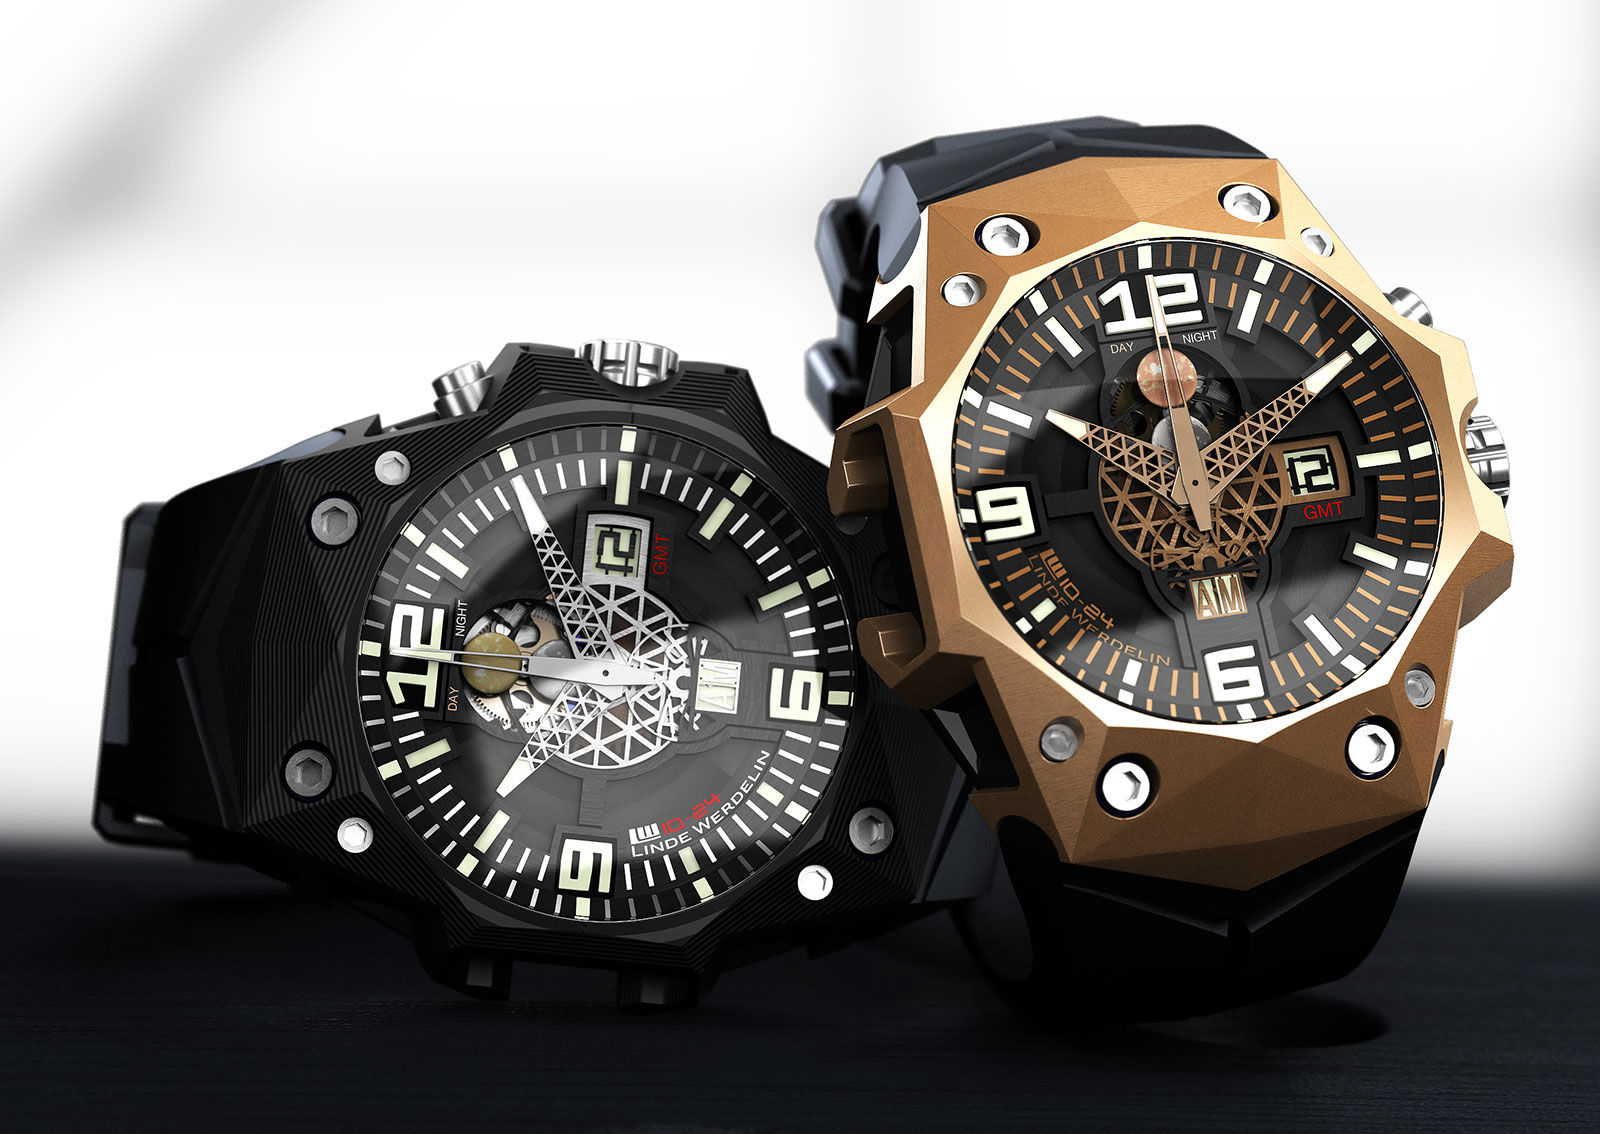 Check your inbox: 4 by-invite-only watches that surpass exclusivity